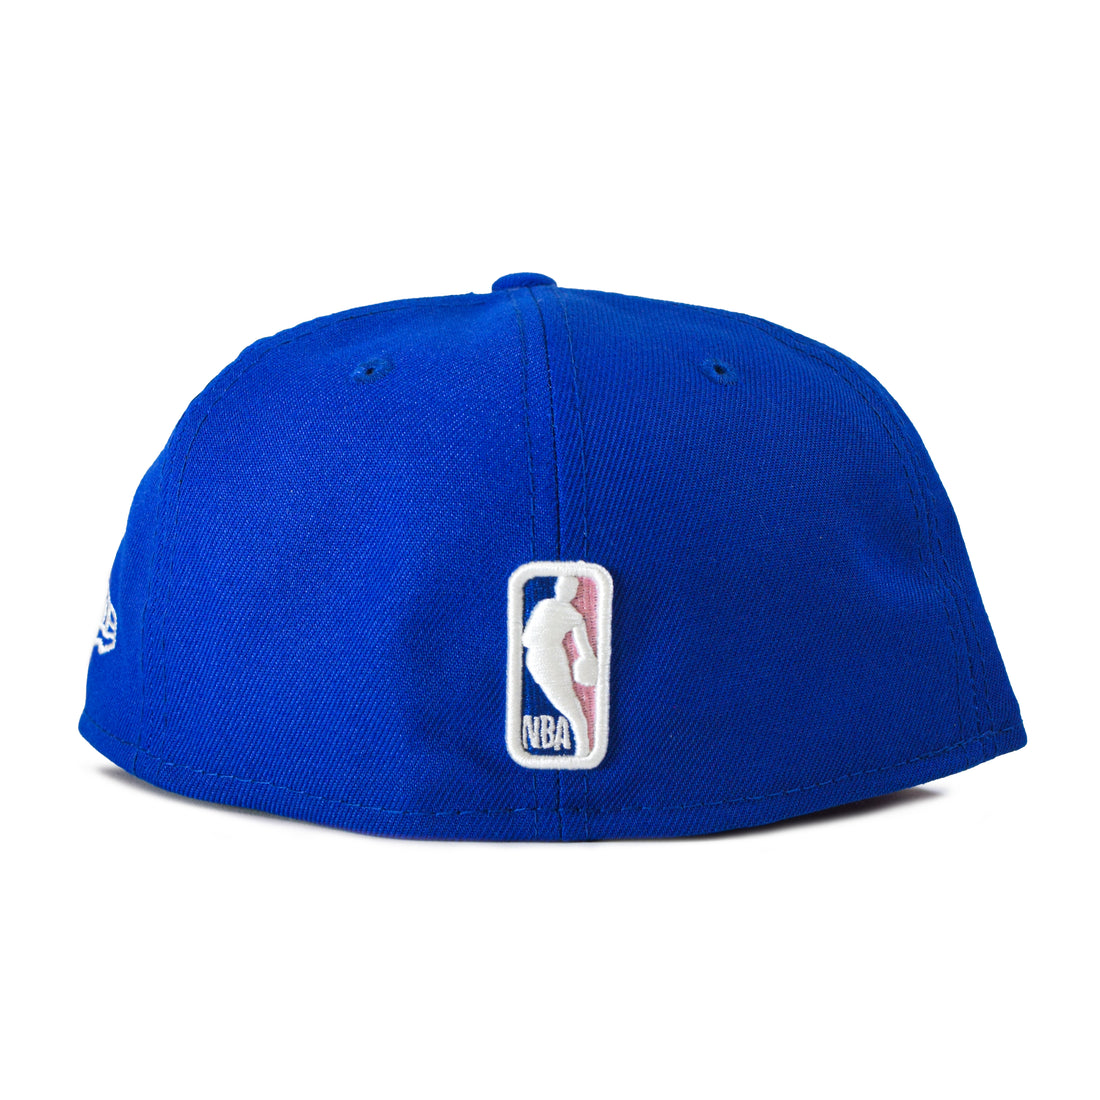 New Era Detroit Pistons "Pop Sweat" 59Fifty Fitted - Blue